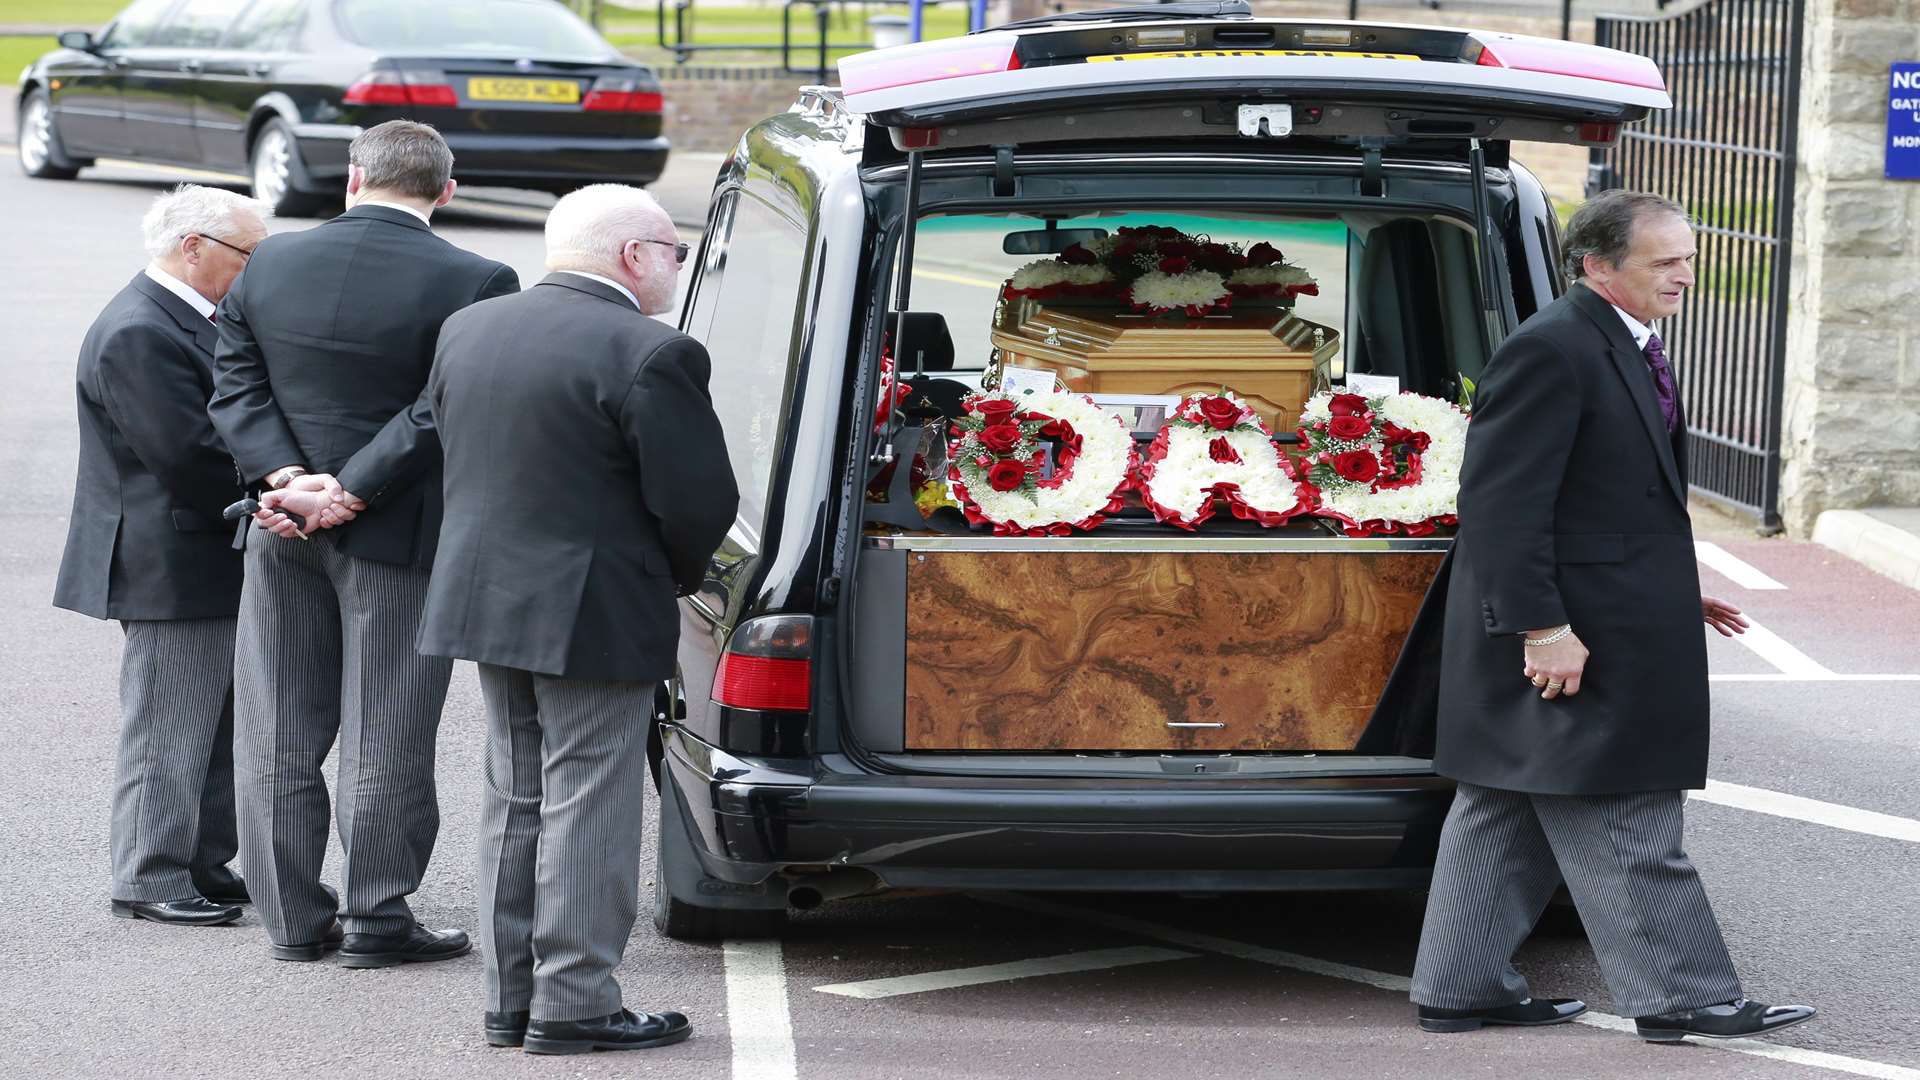 Mr Acott's coffin was transferred into a hearse for the final part of his journey. Picture: Martin Apps